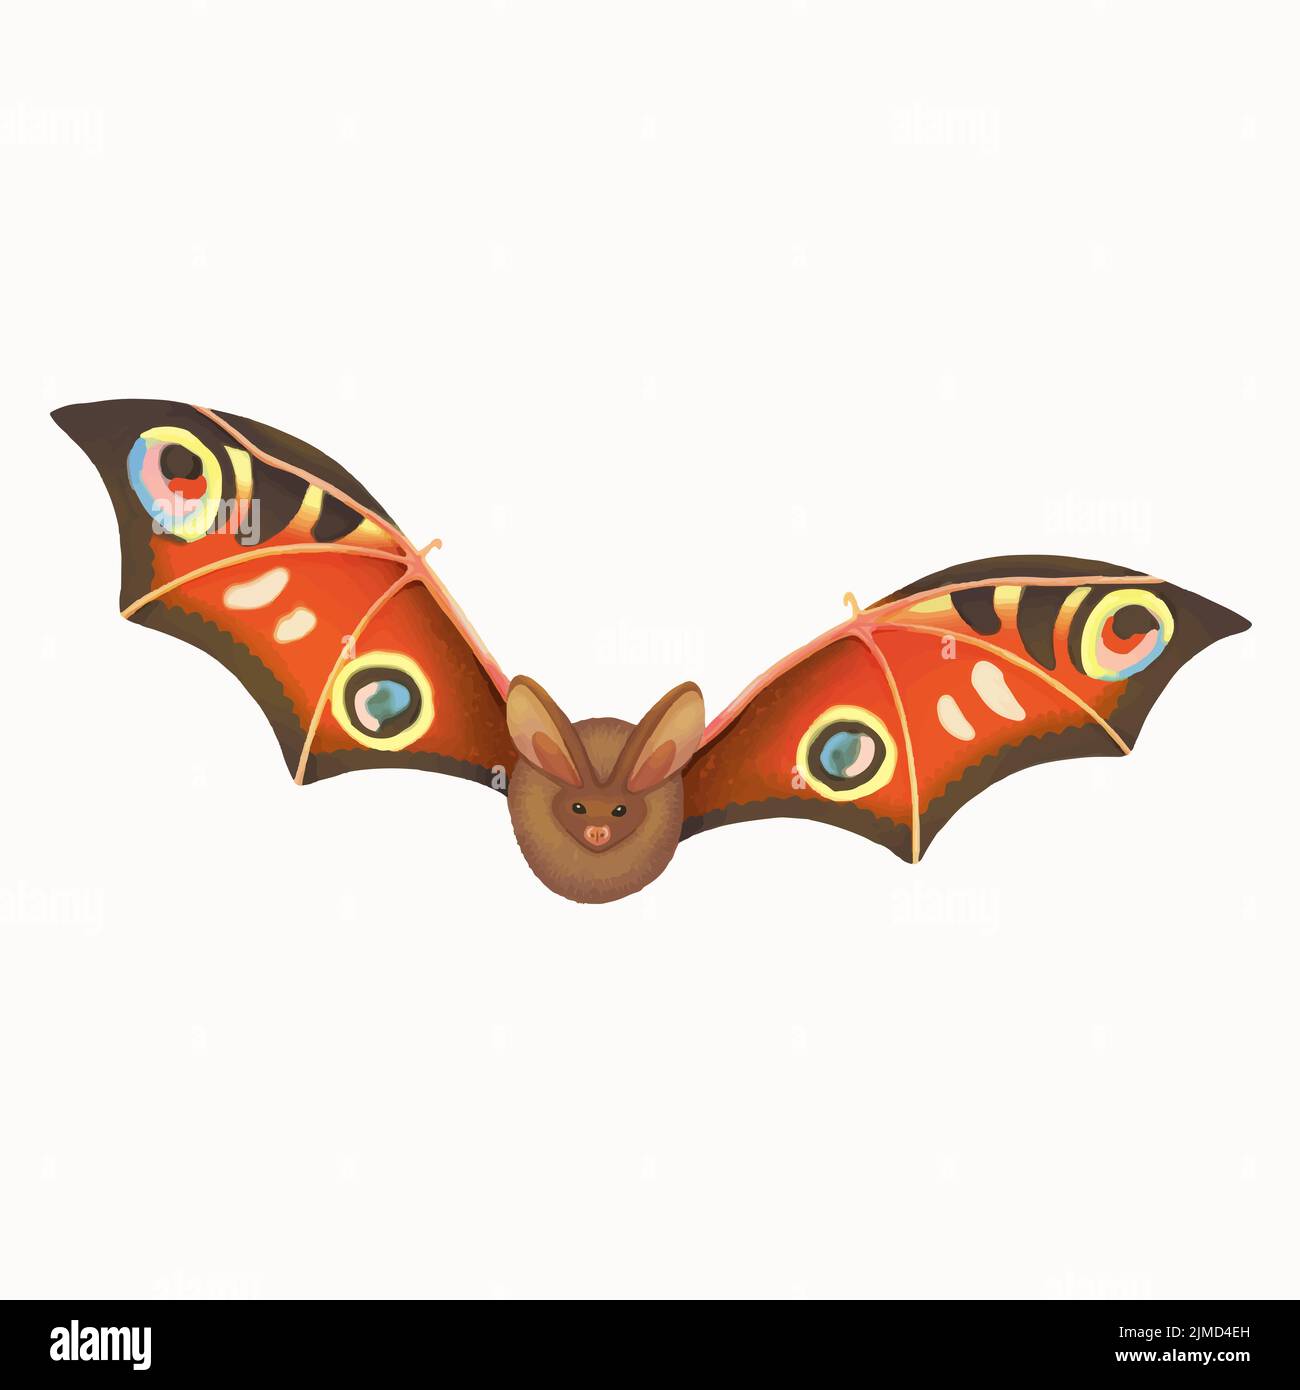 Bat with butterfly wings. Isolated on white background stock vector illustration. Stock Vector